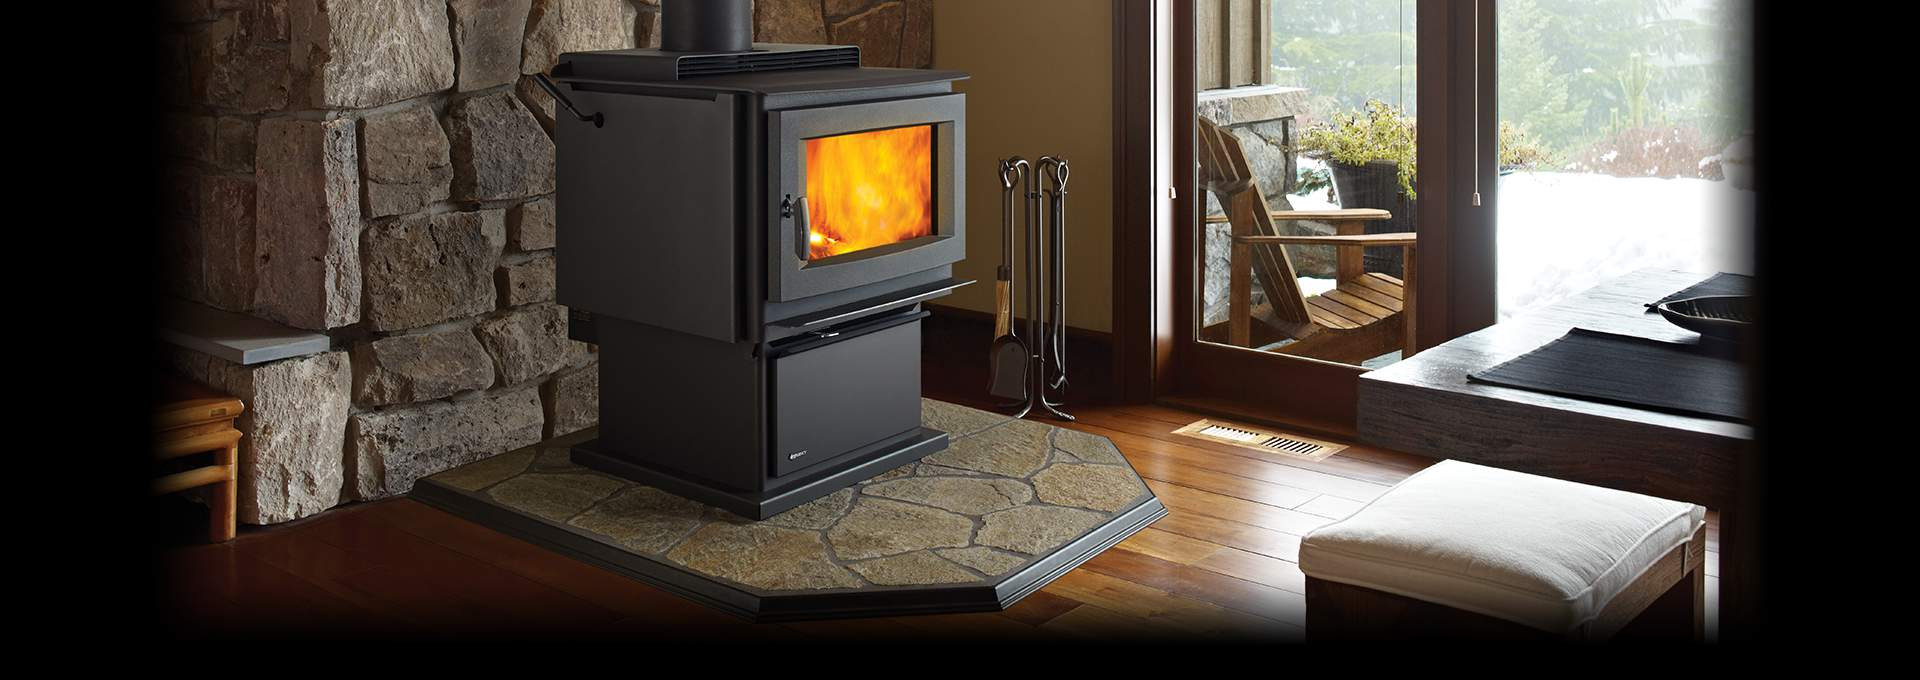 How to Heat Your House with A Fireplace Luxury 26 Re Mended Hardwood Floor Fireplace Transition